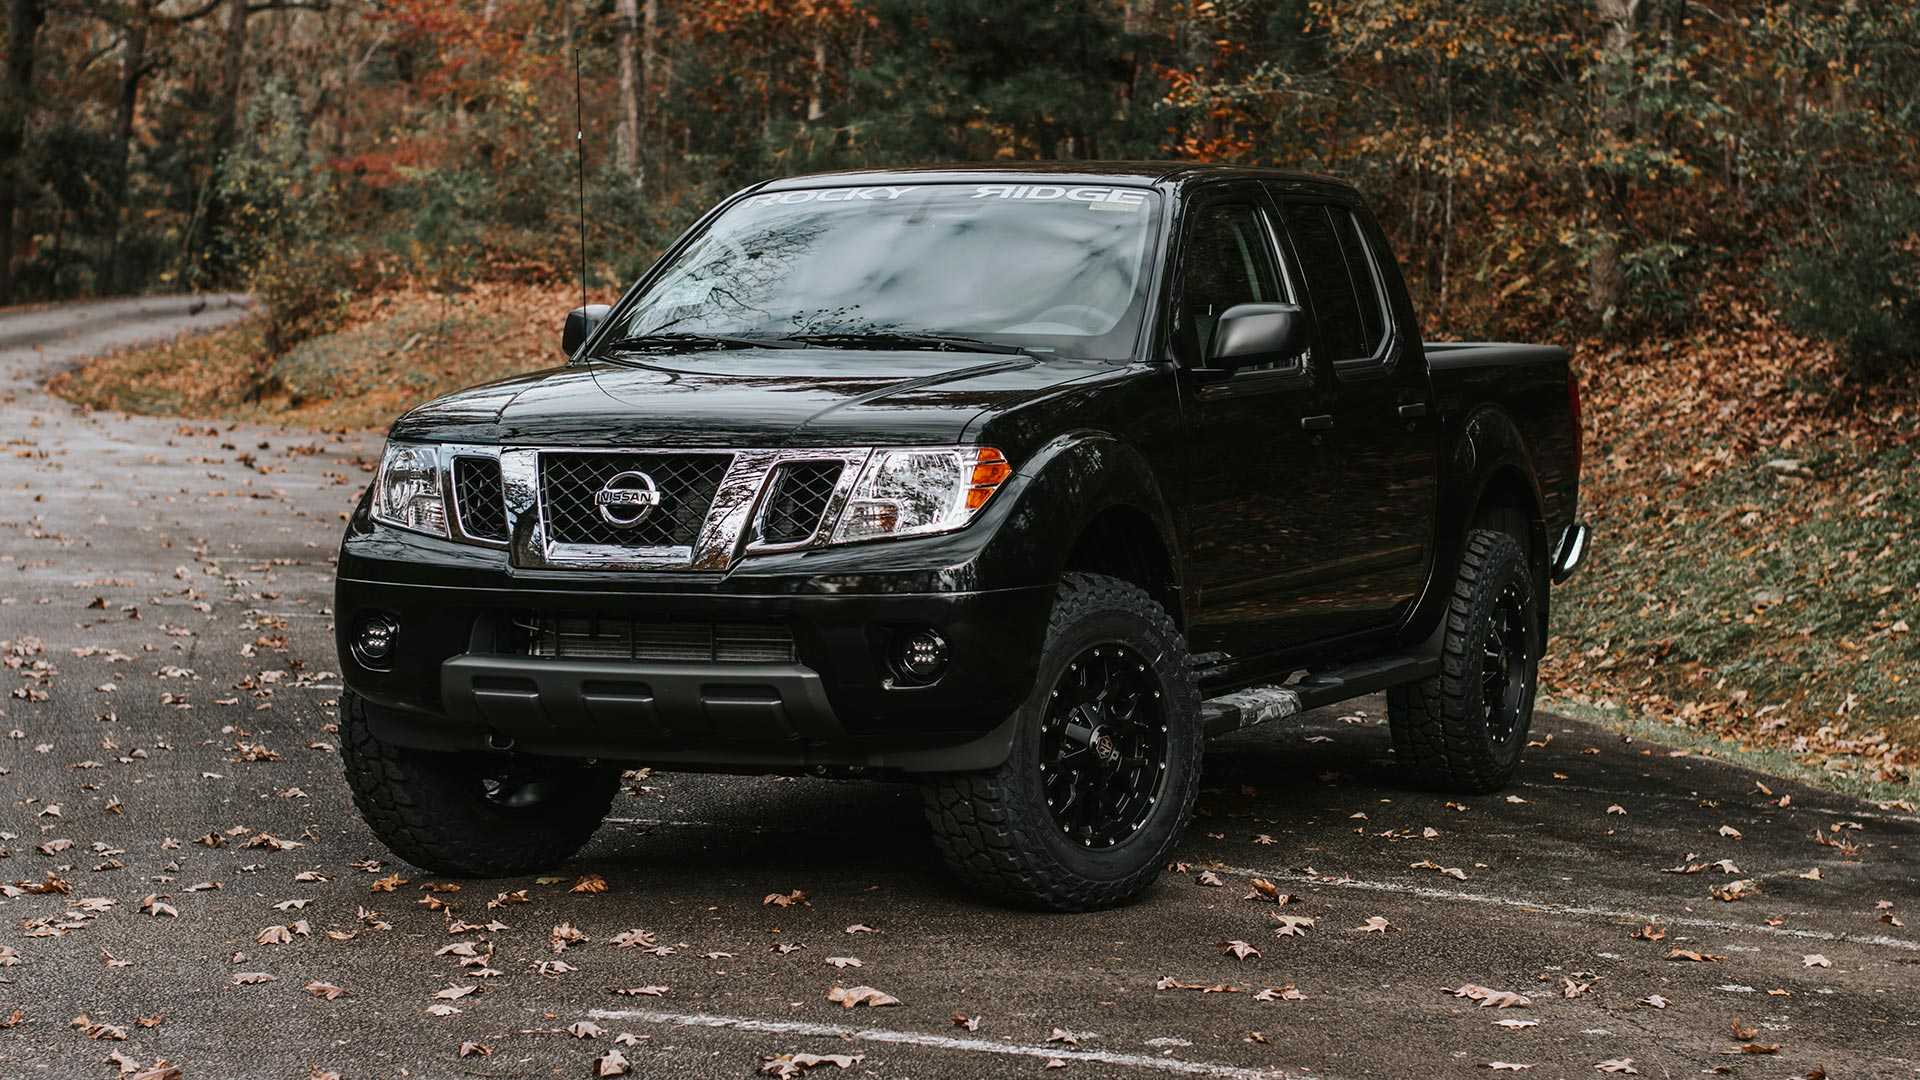 Free download Nissan And Rocky Ridge Debut Rugged Titan Frontier And Armada [1920x1080] for your Desktop, Mobile & Tablet. Explore Nissan Trucks Wallpaper. RAM Trucks Wallpaper, Chevy Trucks Wallpaper